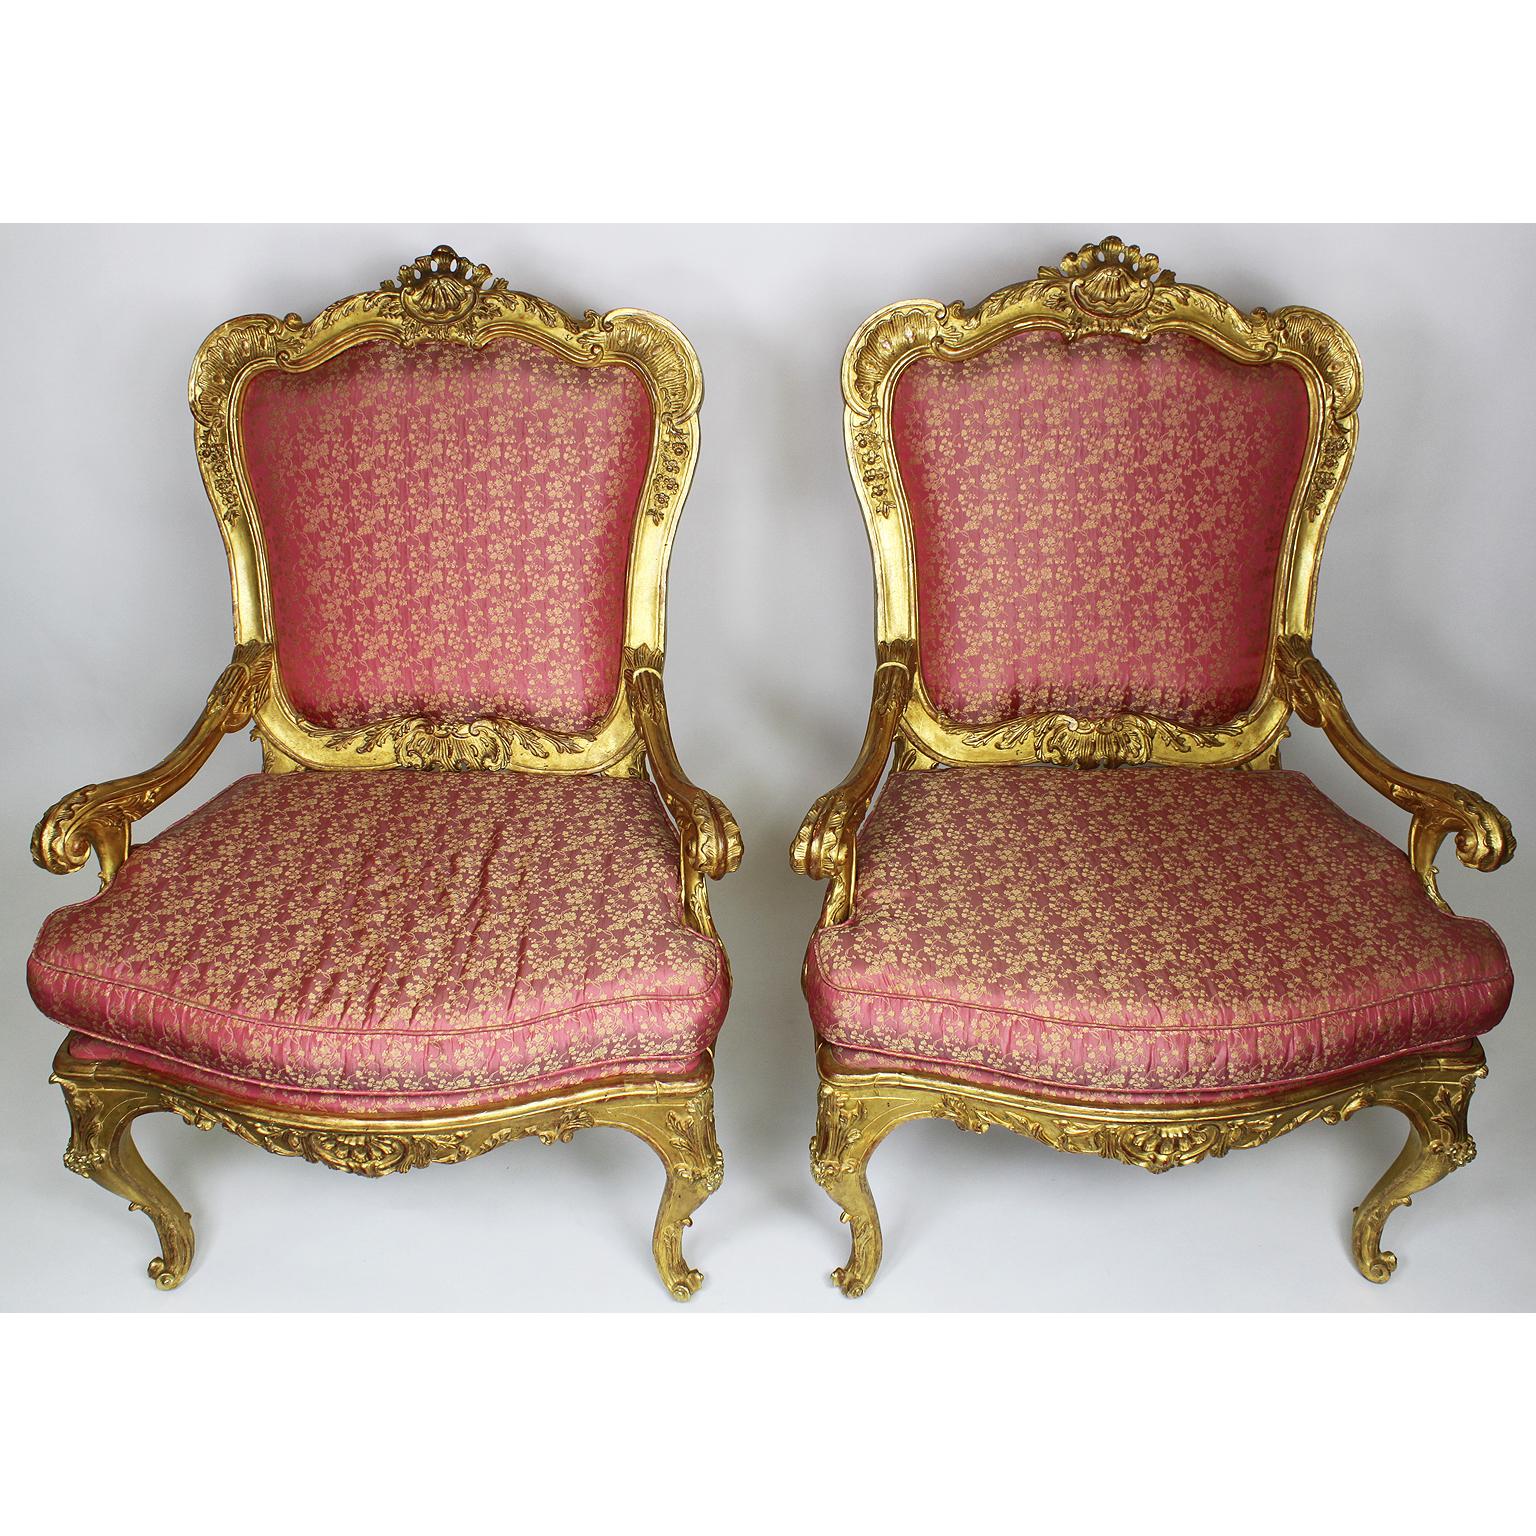 20th Century Pair of Italian Venetian Rococo Revival Style Giltwood Carved Throne Armchairs For Sale